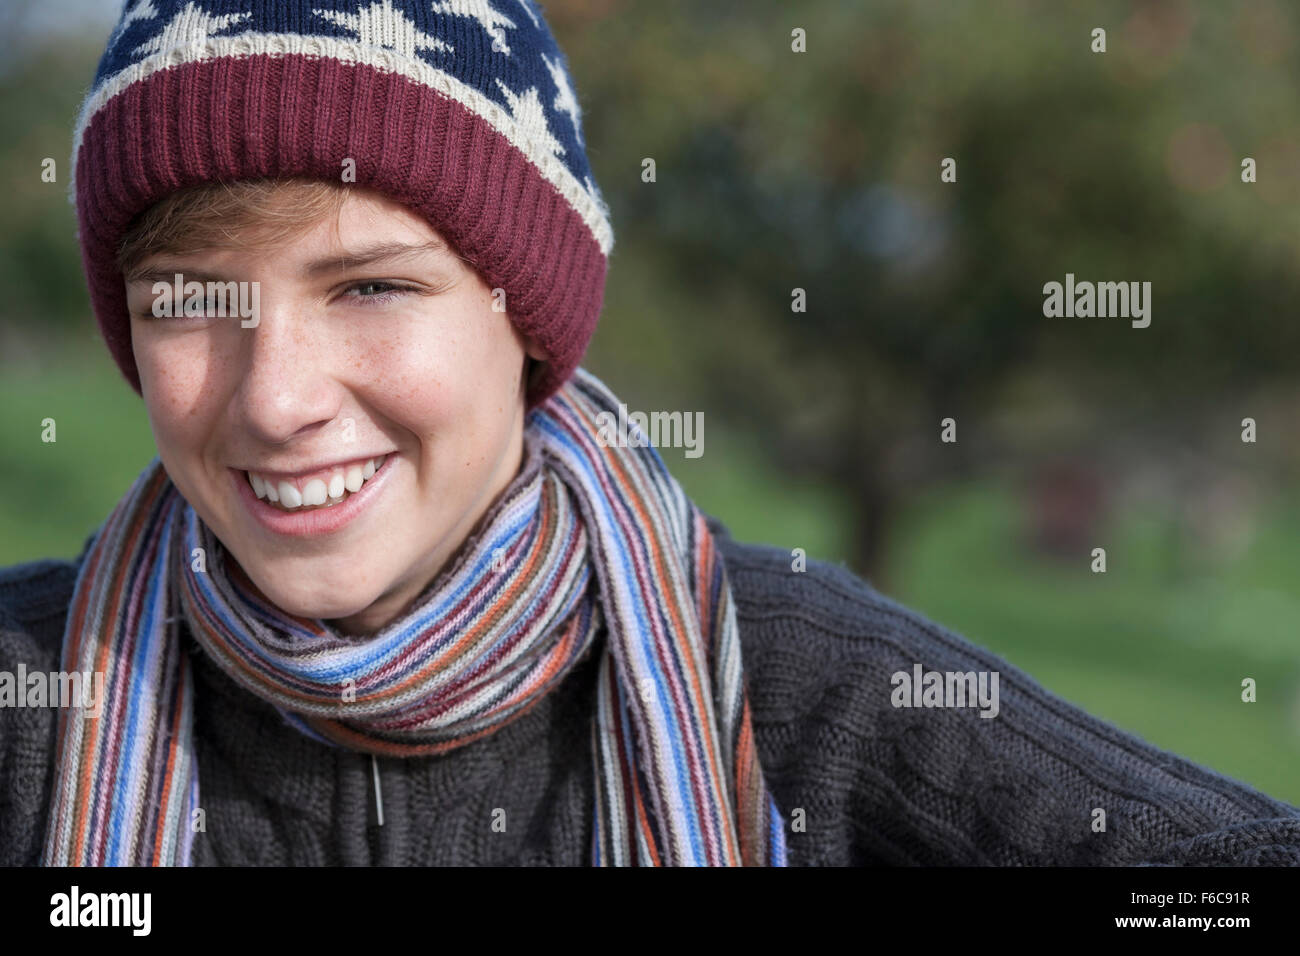 Young happy laughing male boy teenager blond child outside in in warm clothing woolen hat and scarf Stock Photo